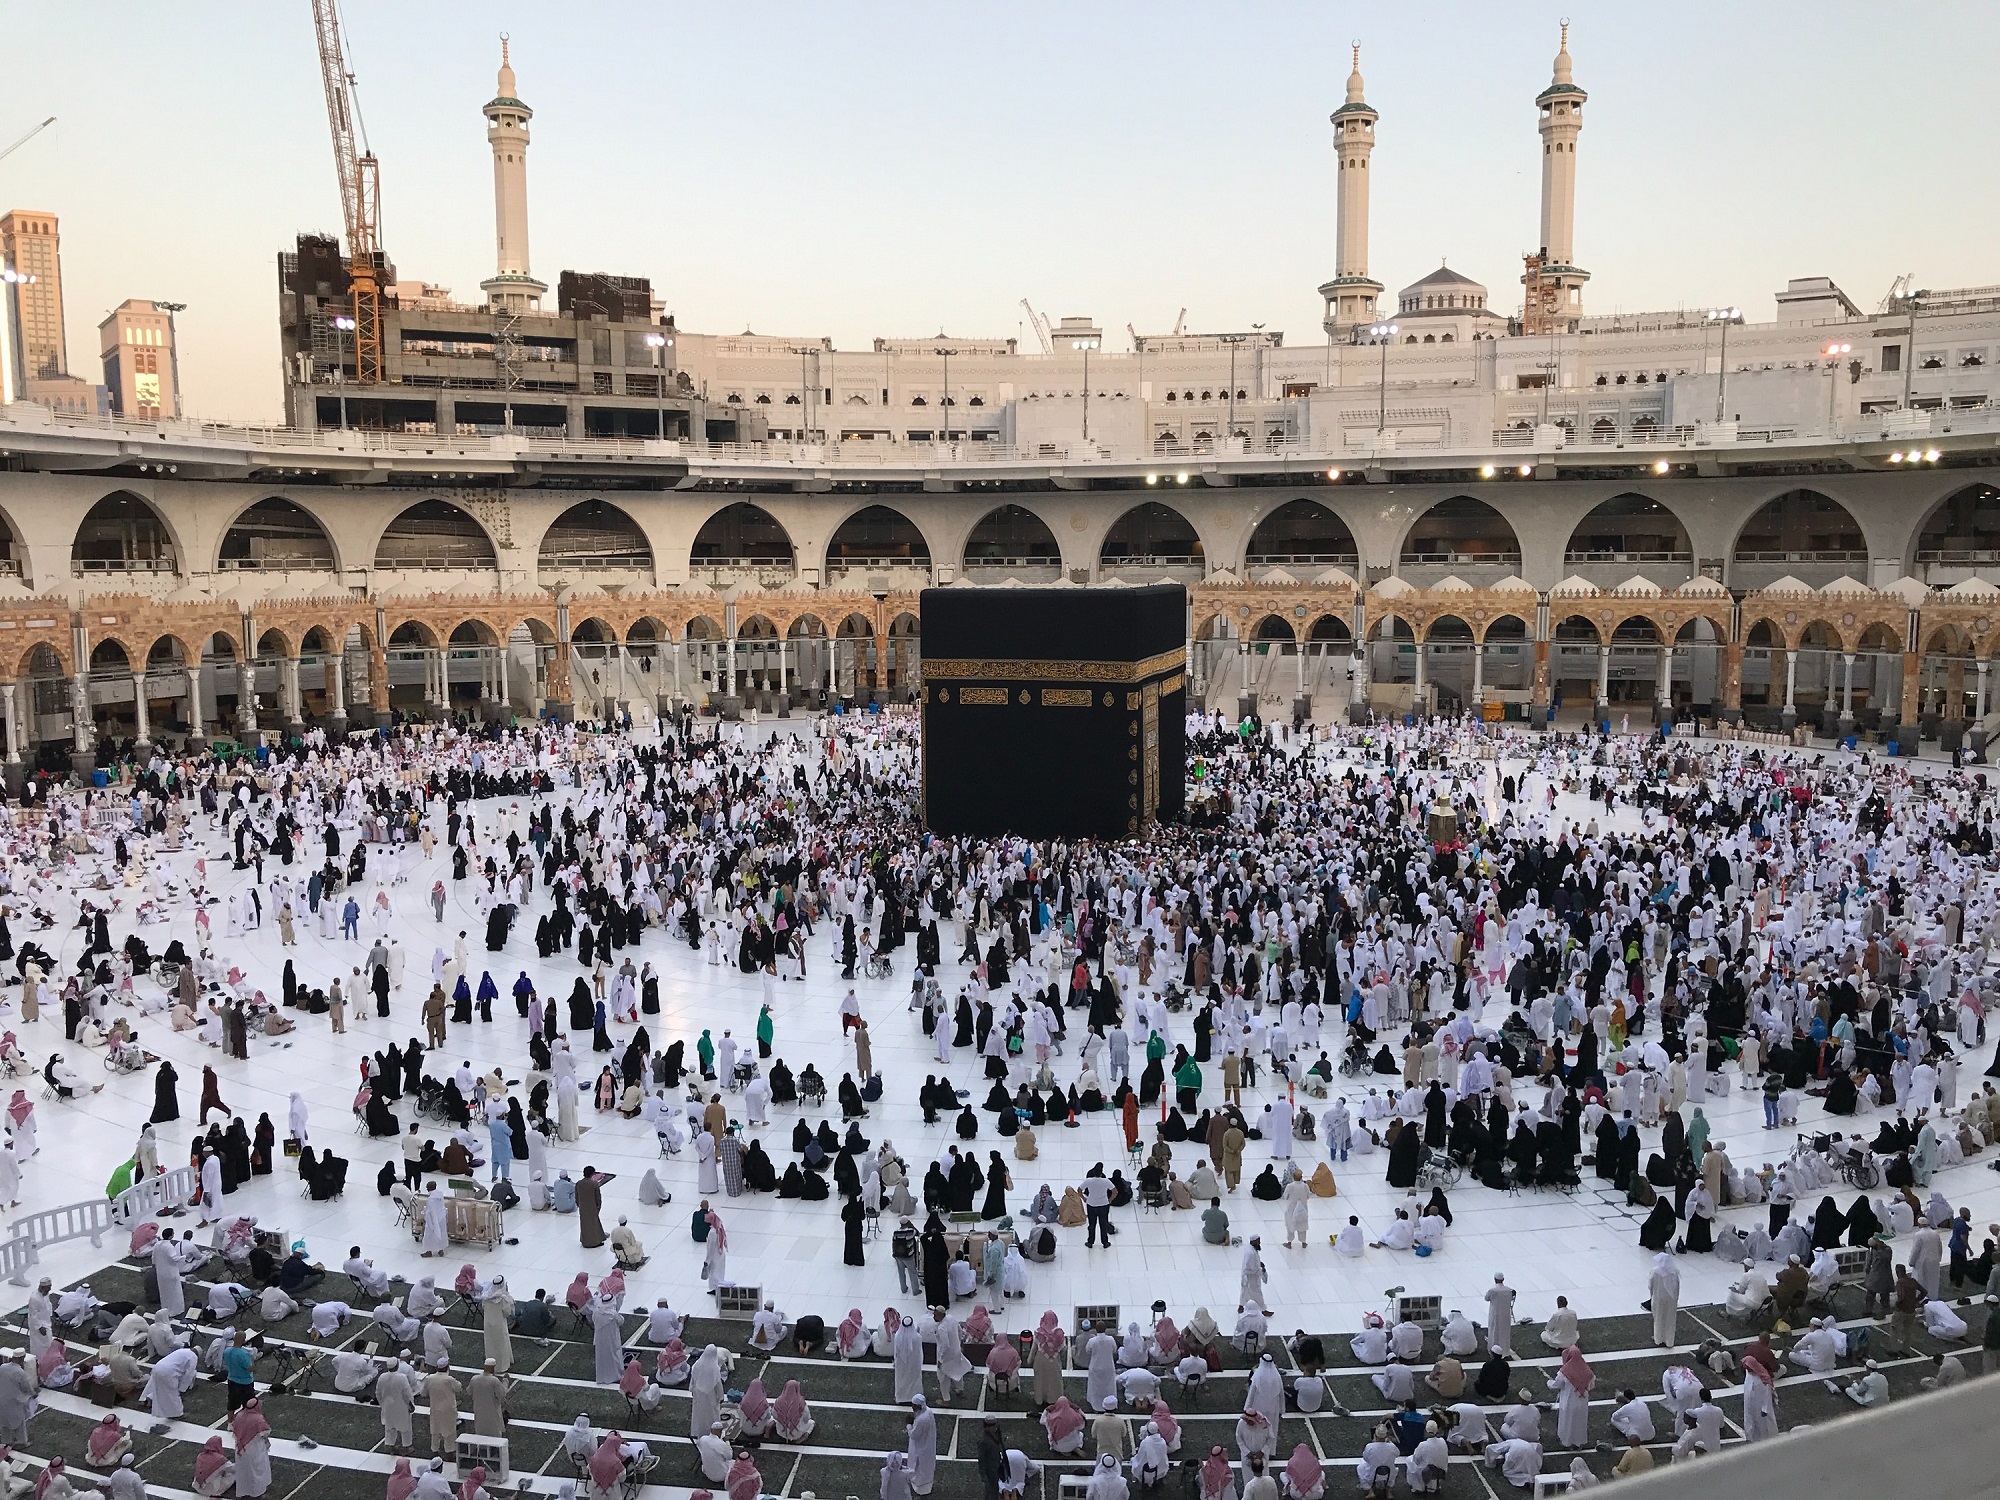 cheap Umrah packages